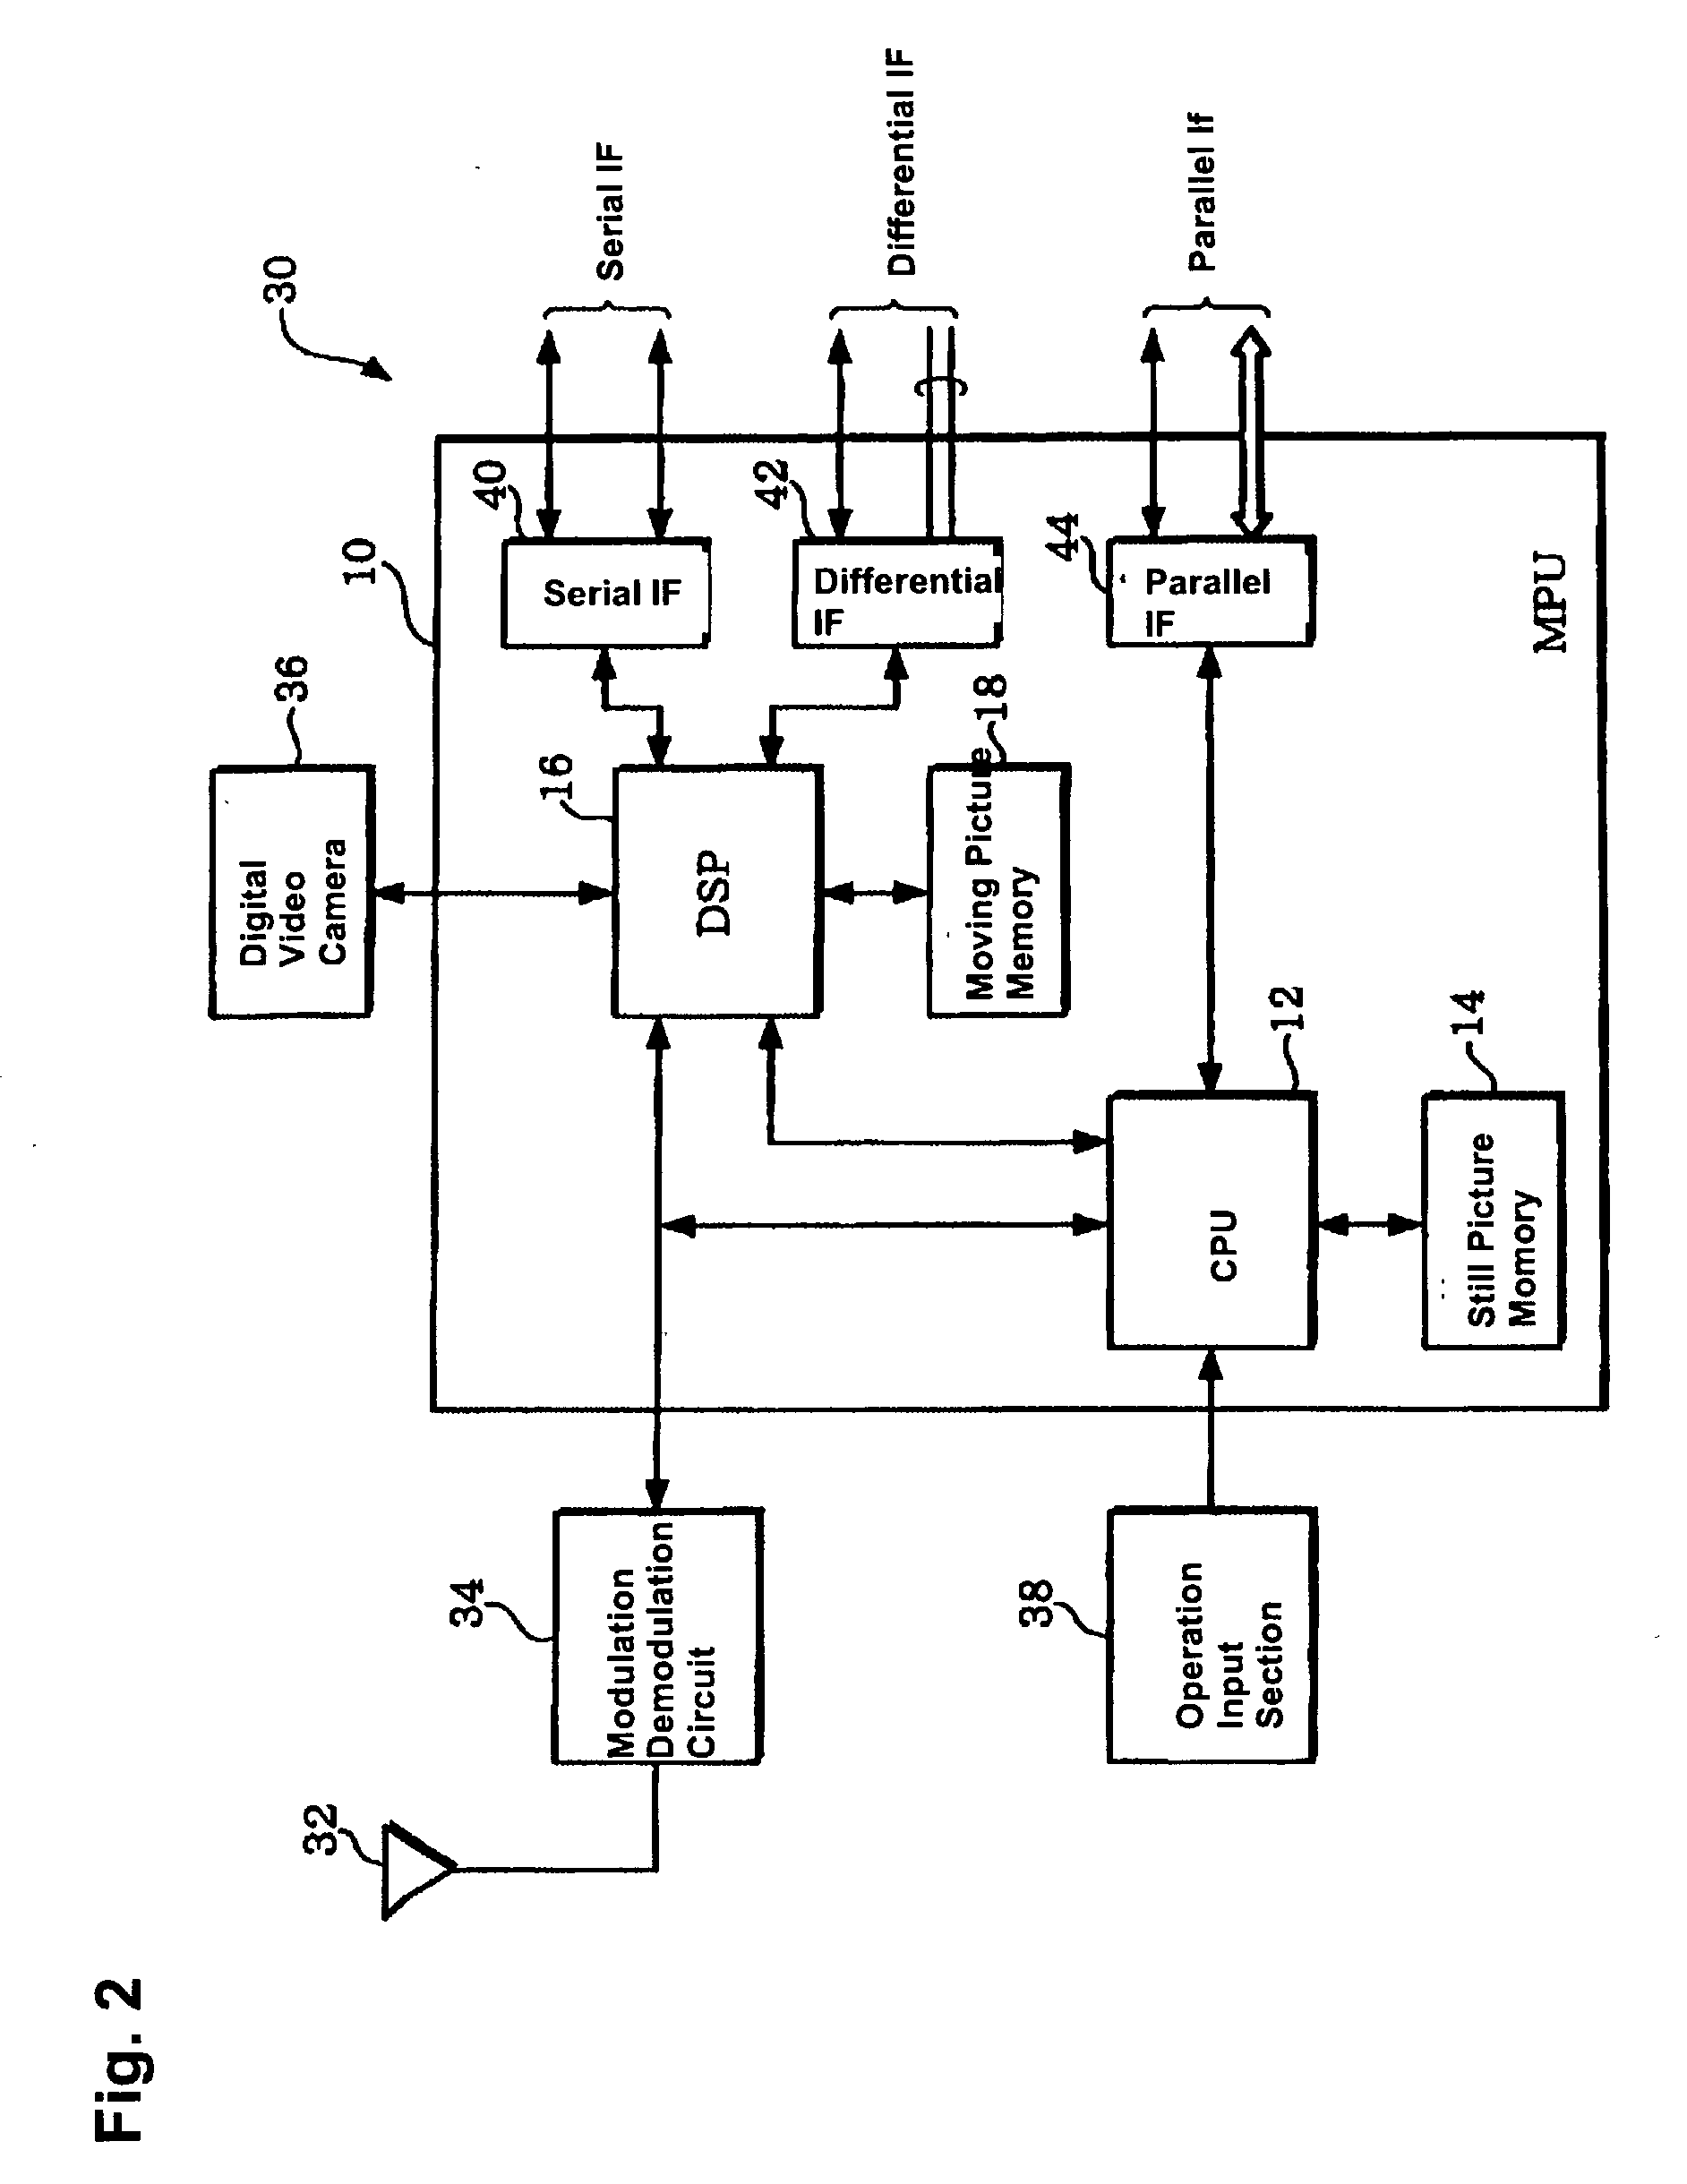 Display controller, display unit and electronic apparatus